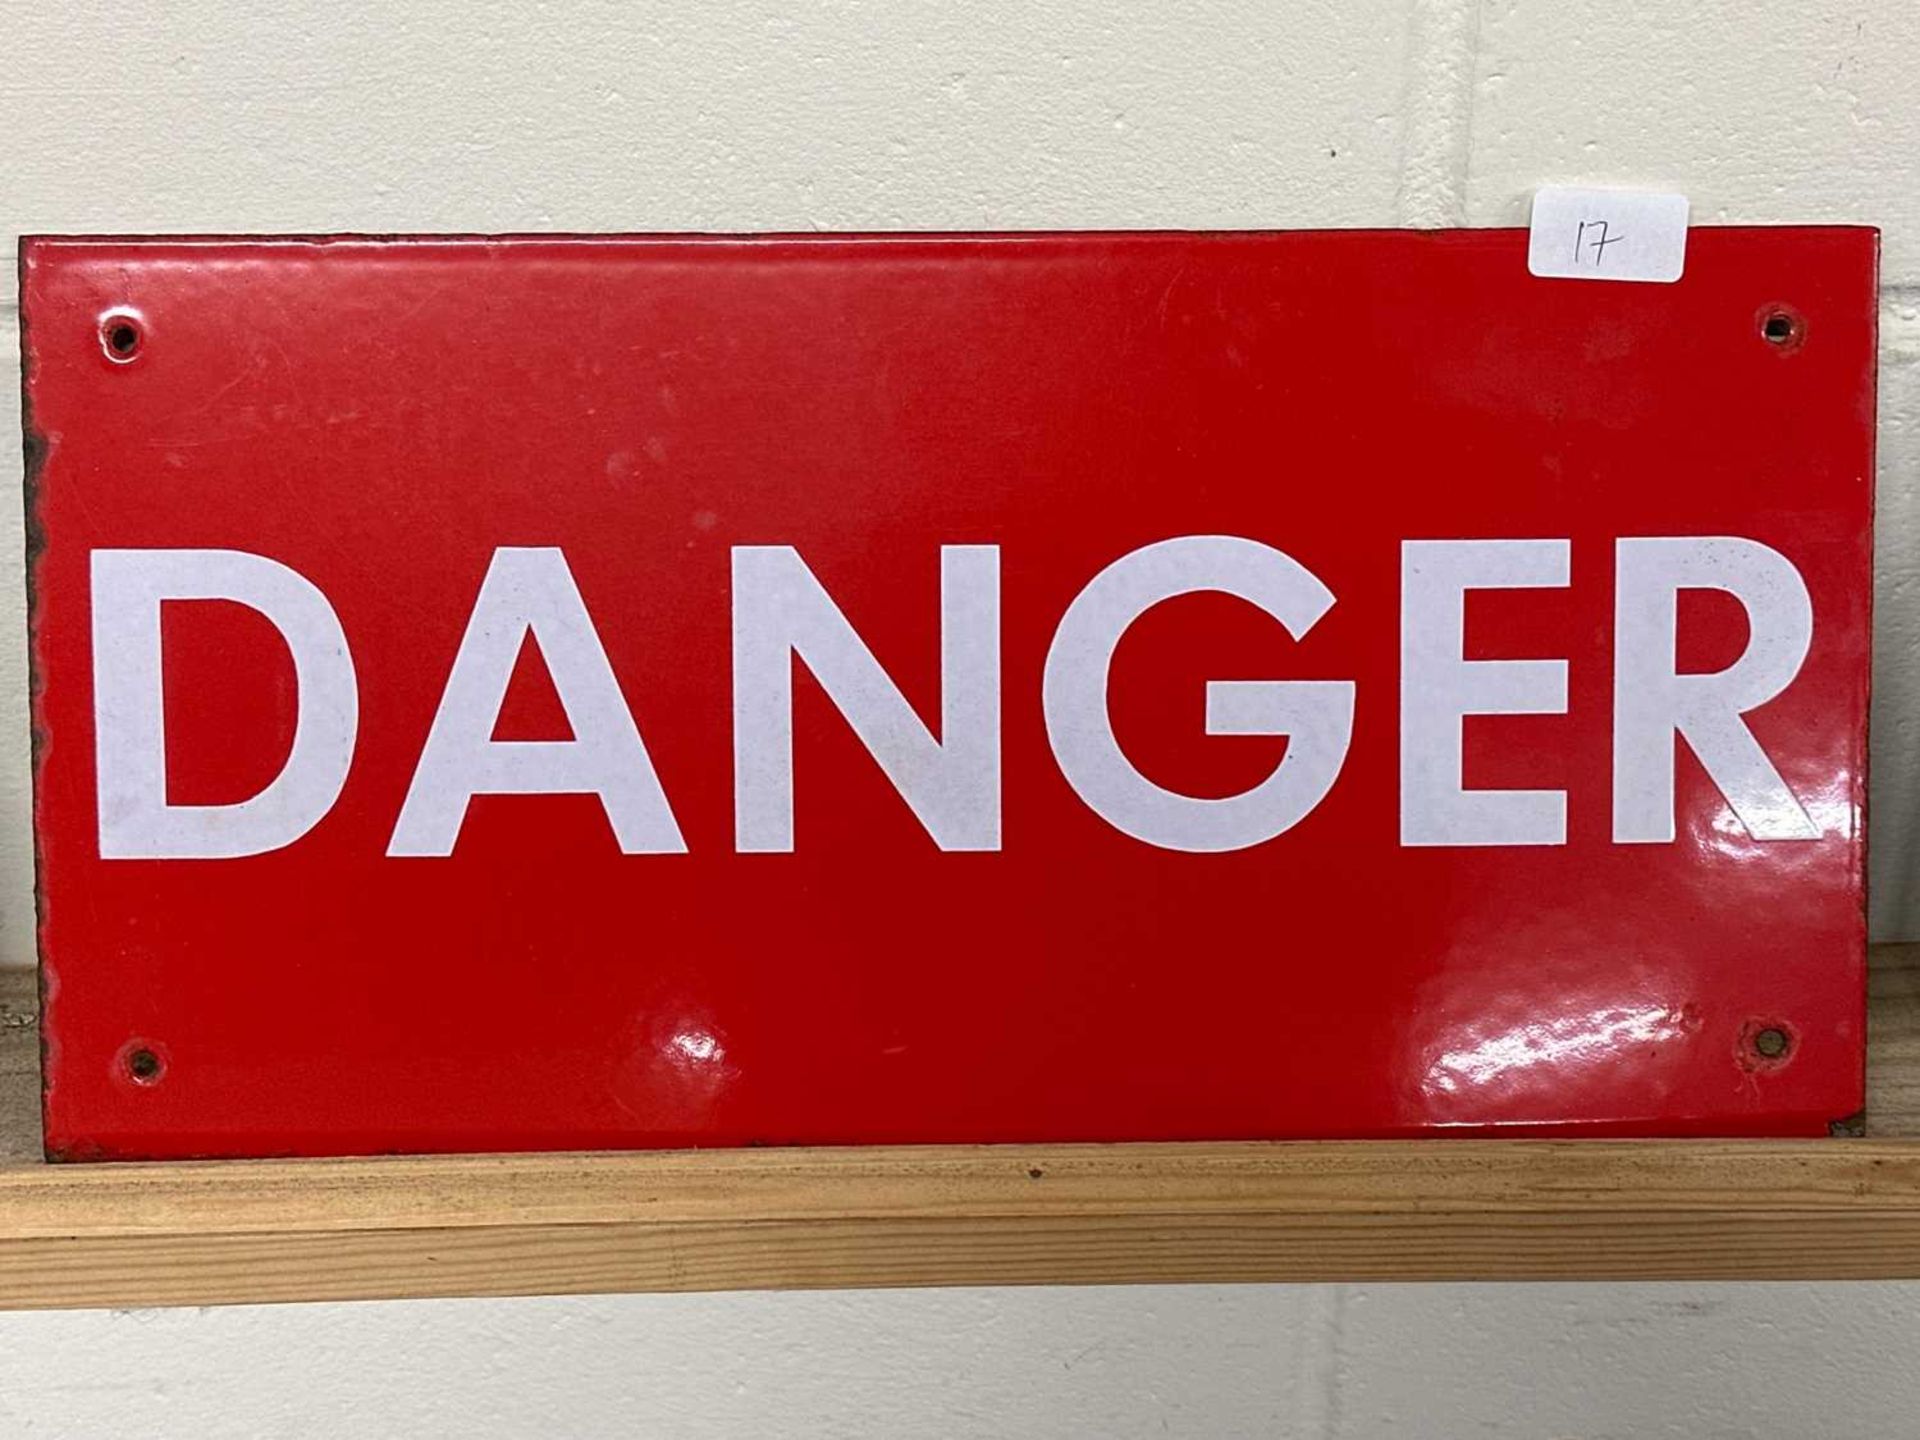 A white on red warning sign "DANGER"